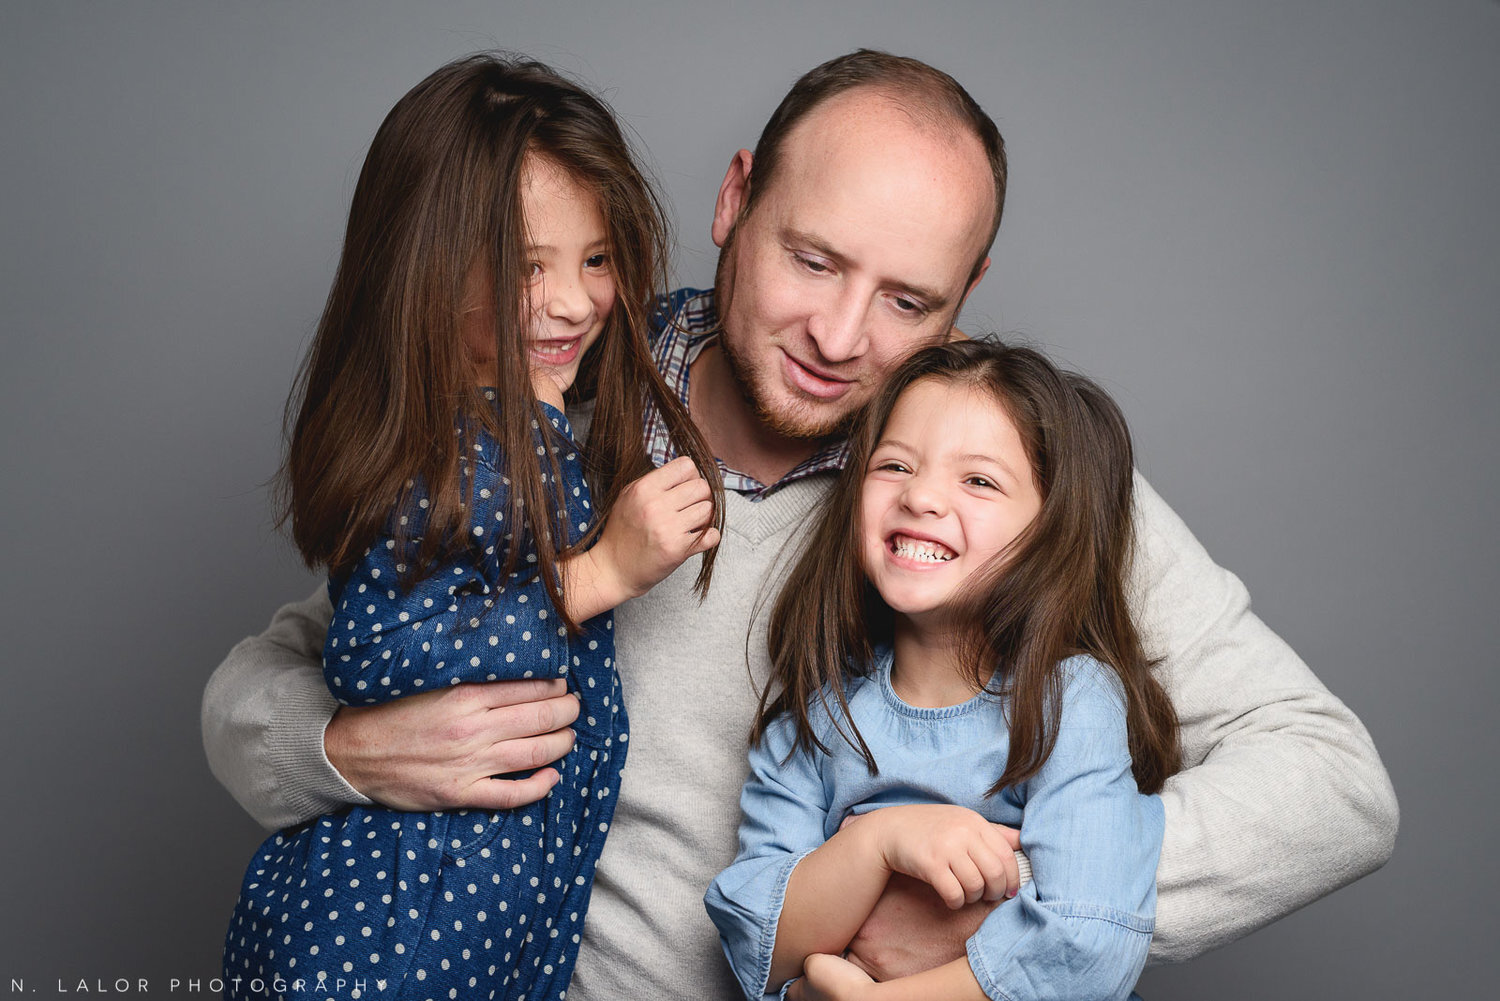 nlalor-photography-2016-12-13-studio-family-two-girls-greenwich-connecticut-10.jpg